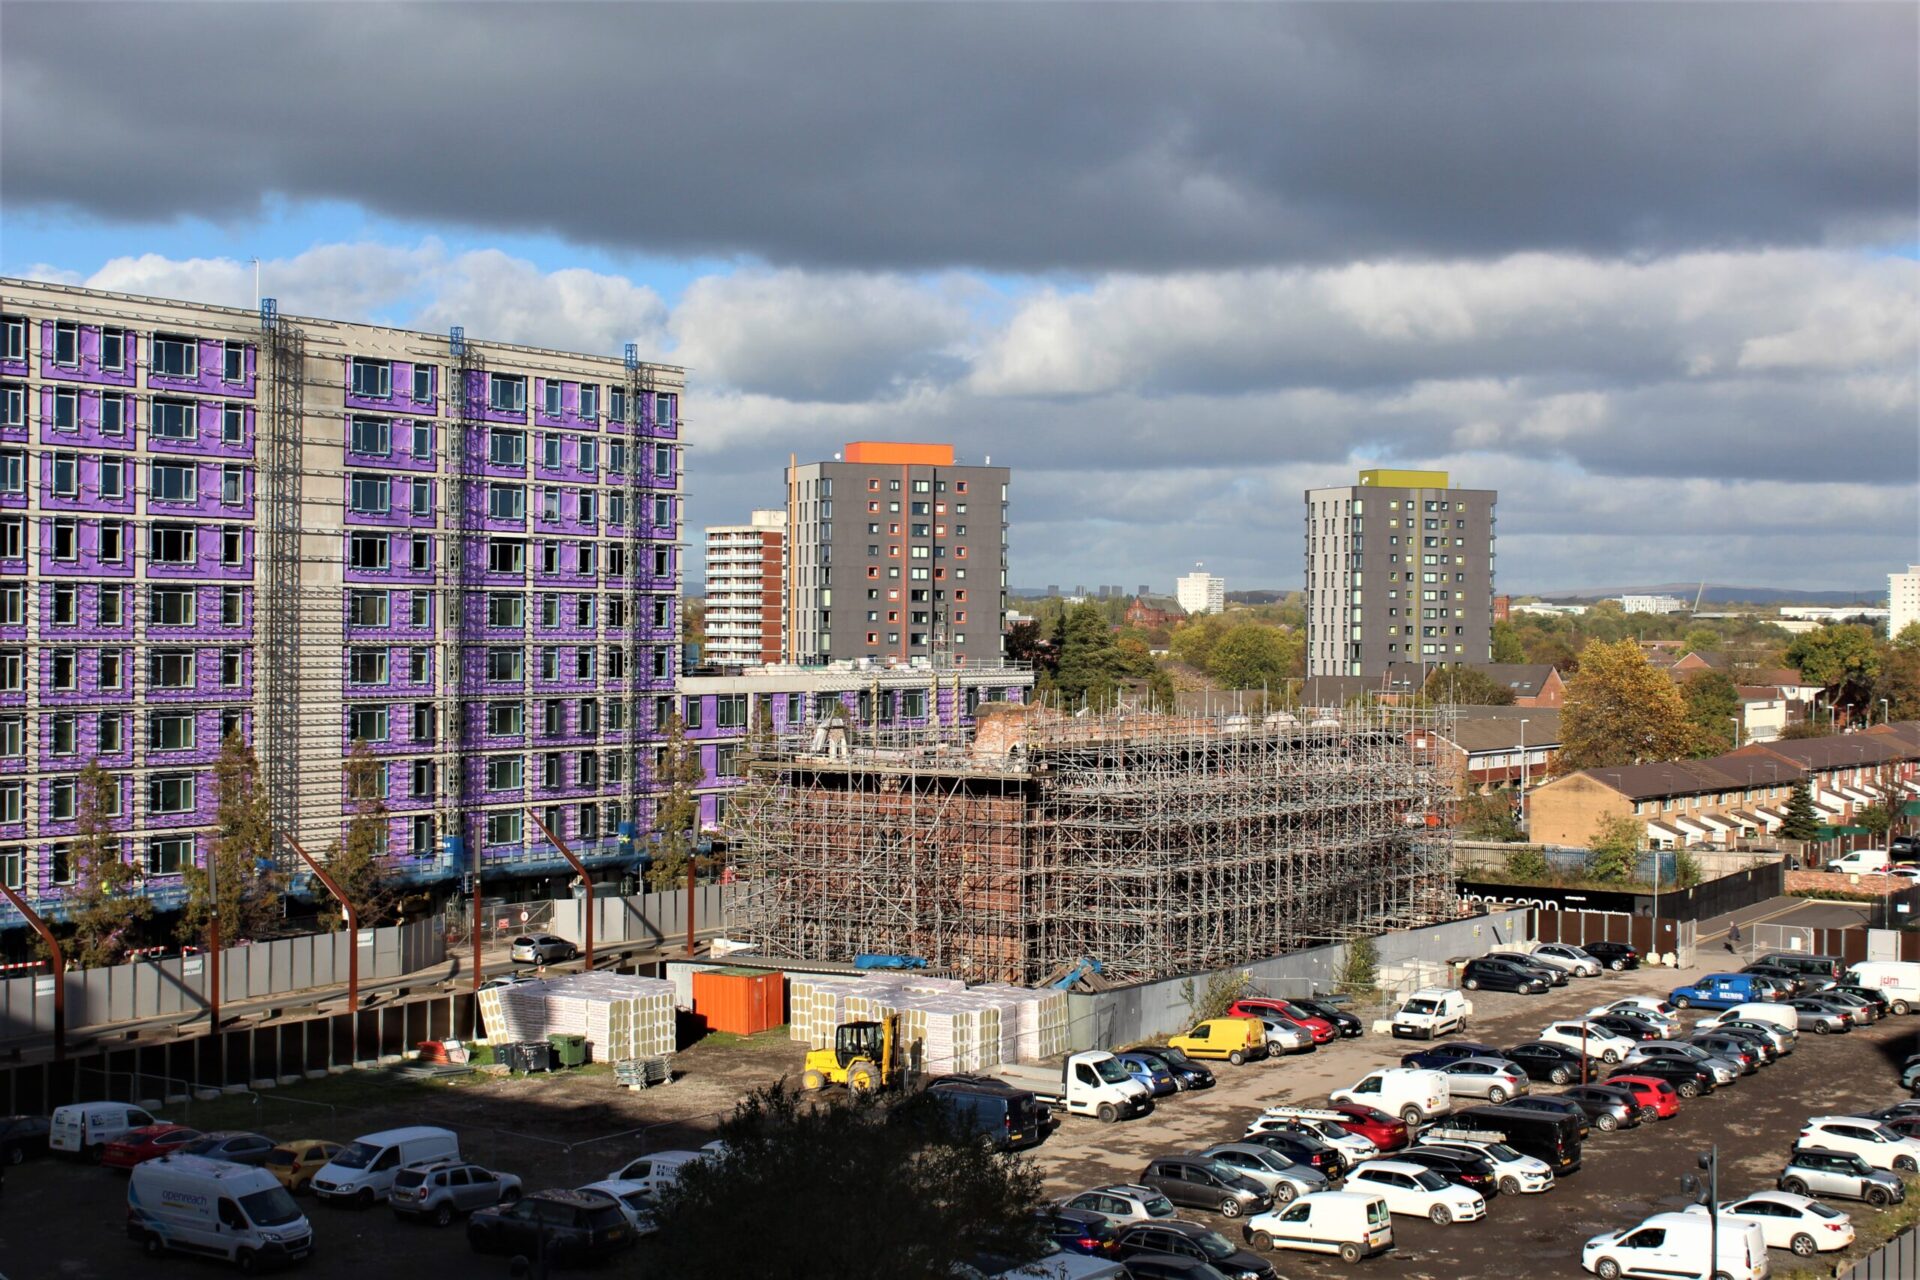 Views from Vesta towards other Manchester Life projects